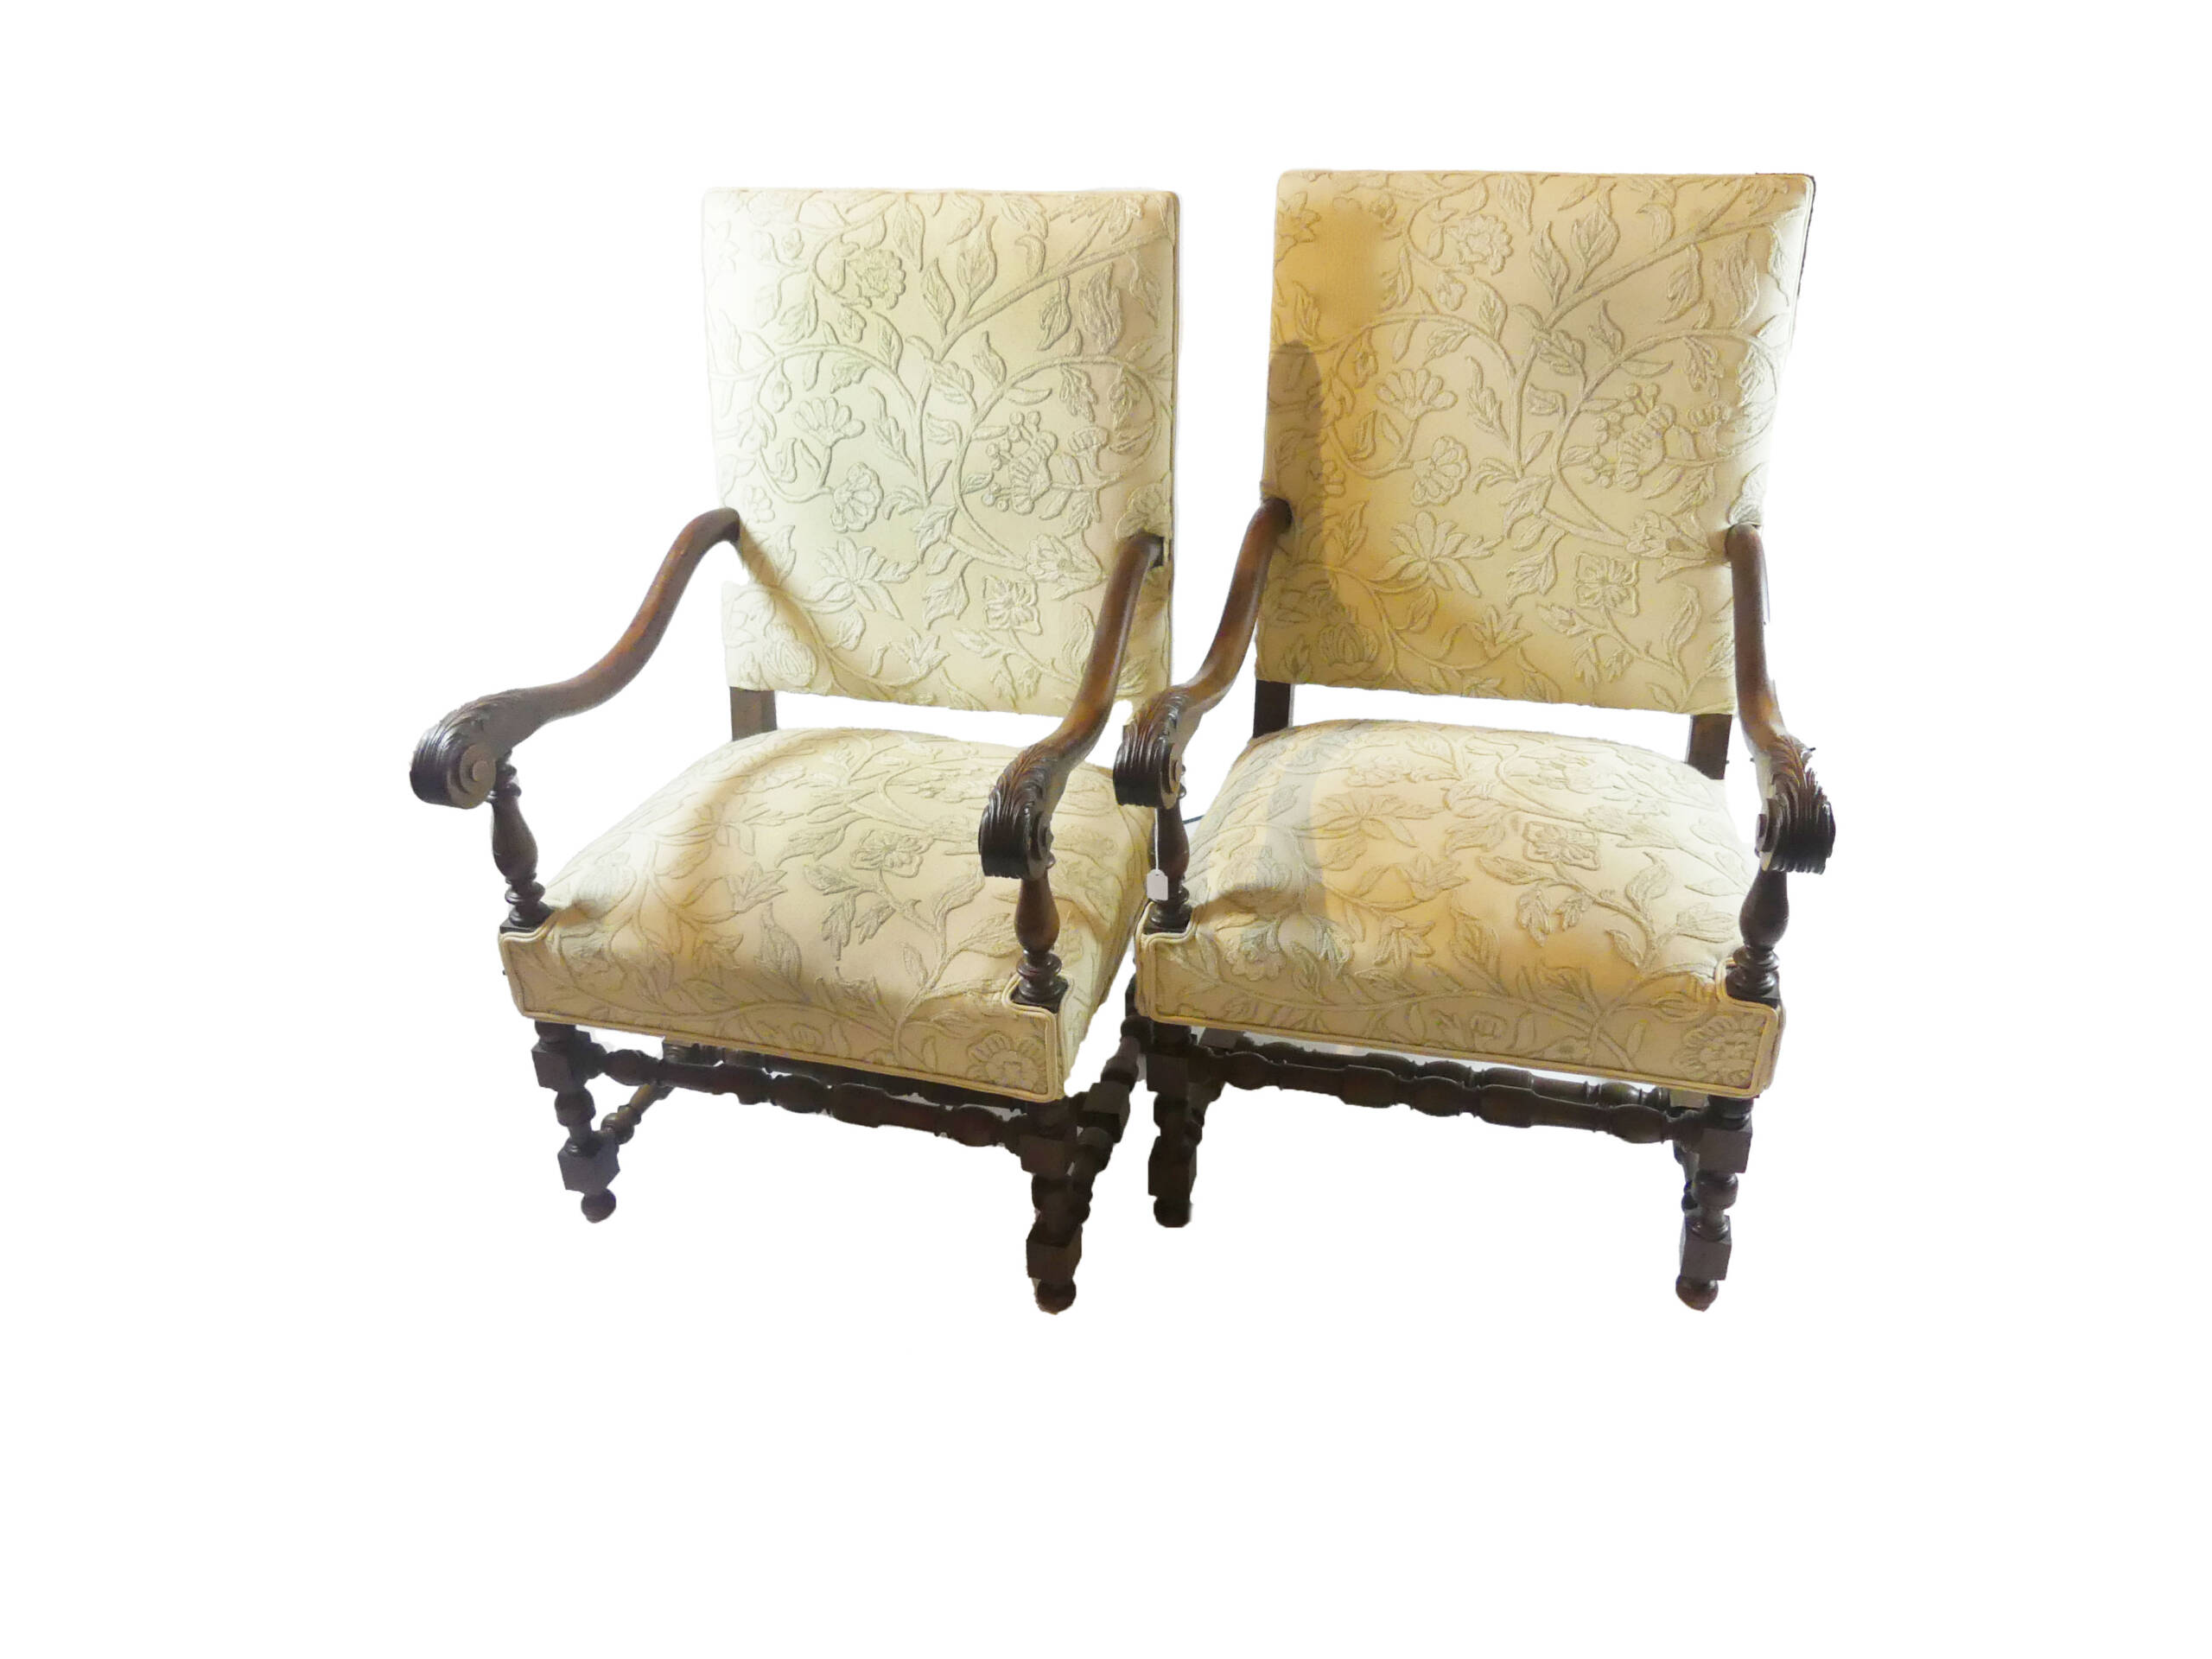 An Impressive Pair of French Louis XV Style Open Armchairs